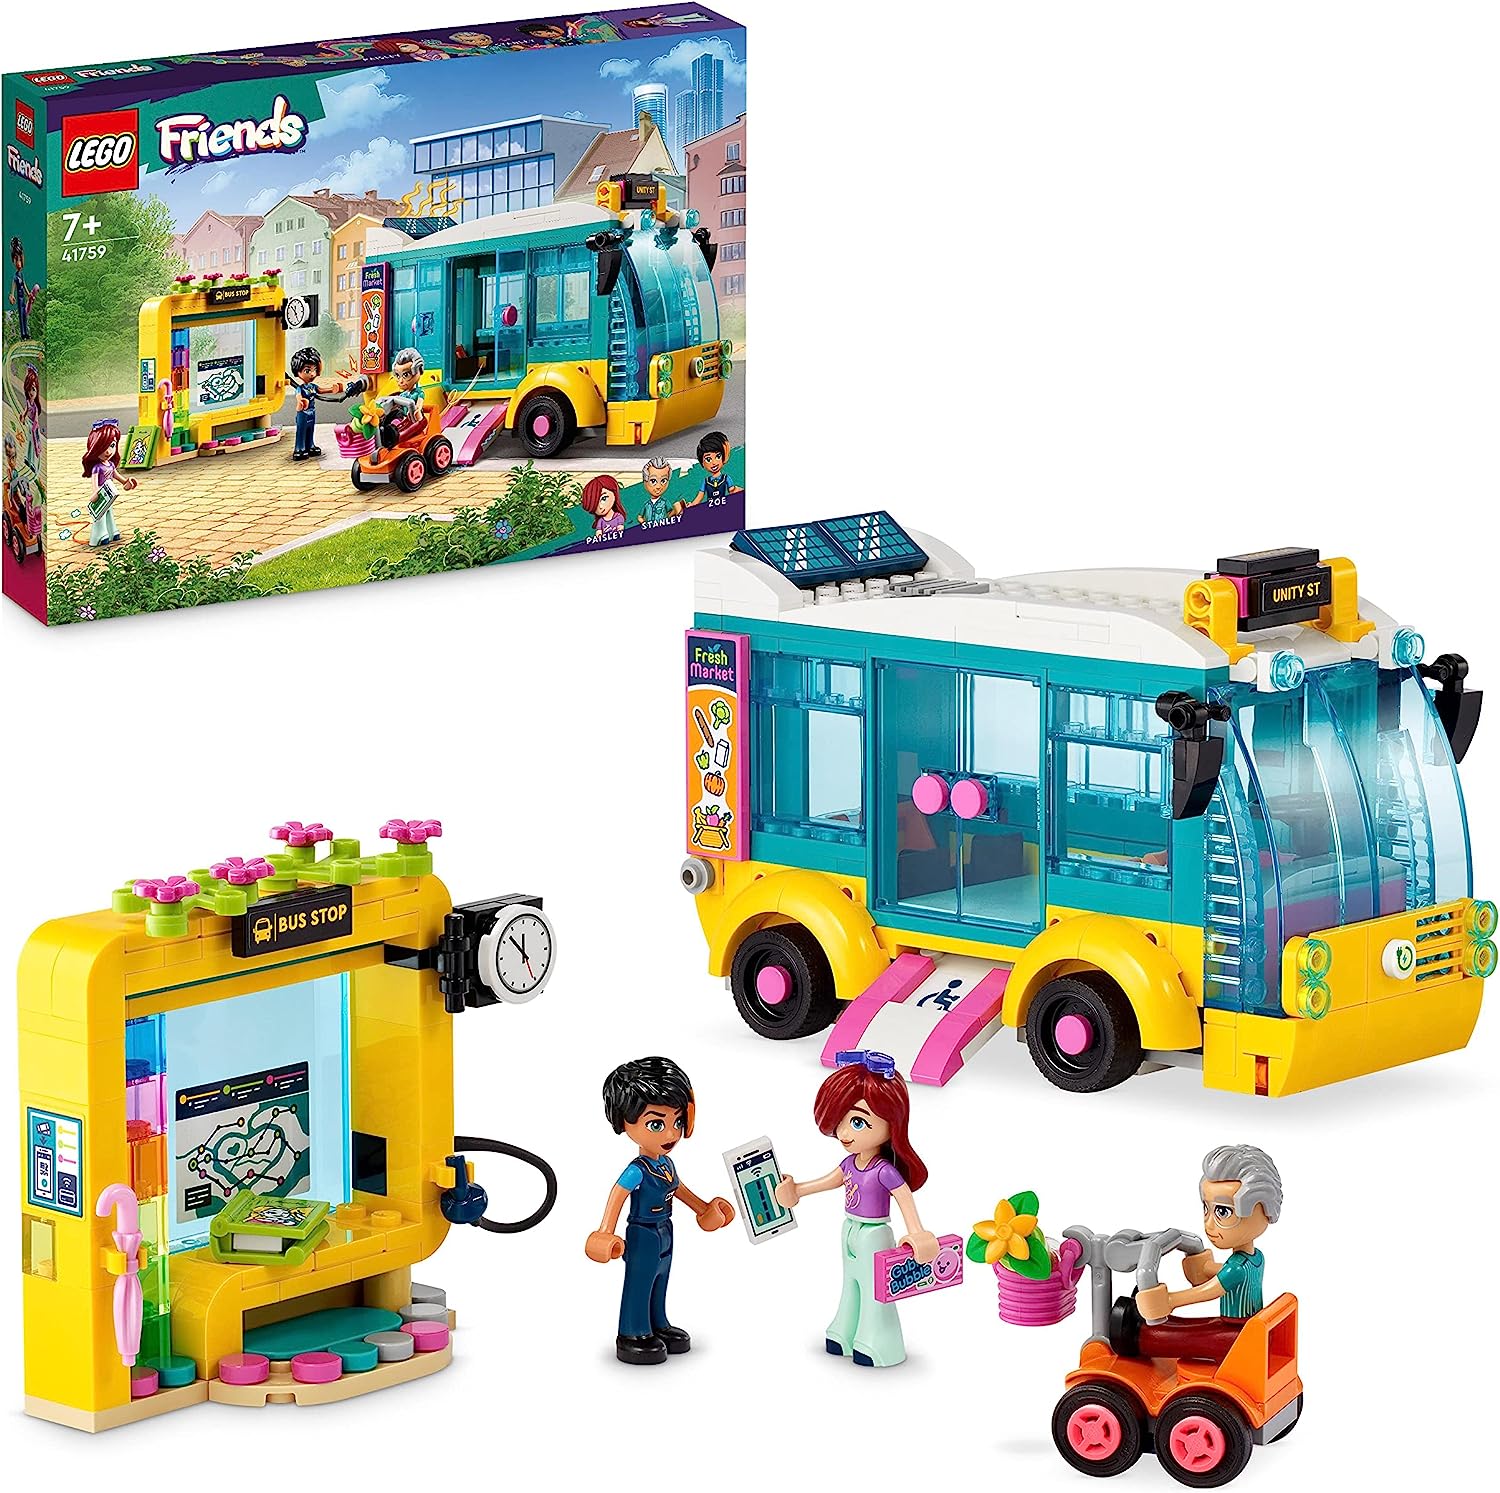 LEGO 41759 Friends Heartlake City City Bus Toy, Mini Dolls & Bus Toy Set with Paisley, Friendship Gift for Children from 7 Years, Girls and Boys (Exclusive to Amazon)